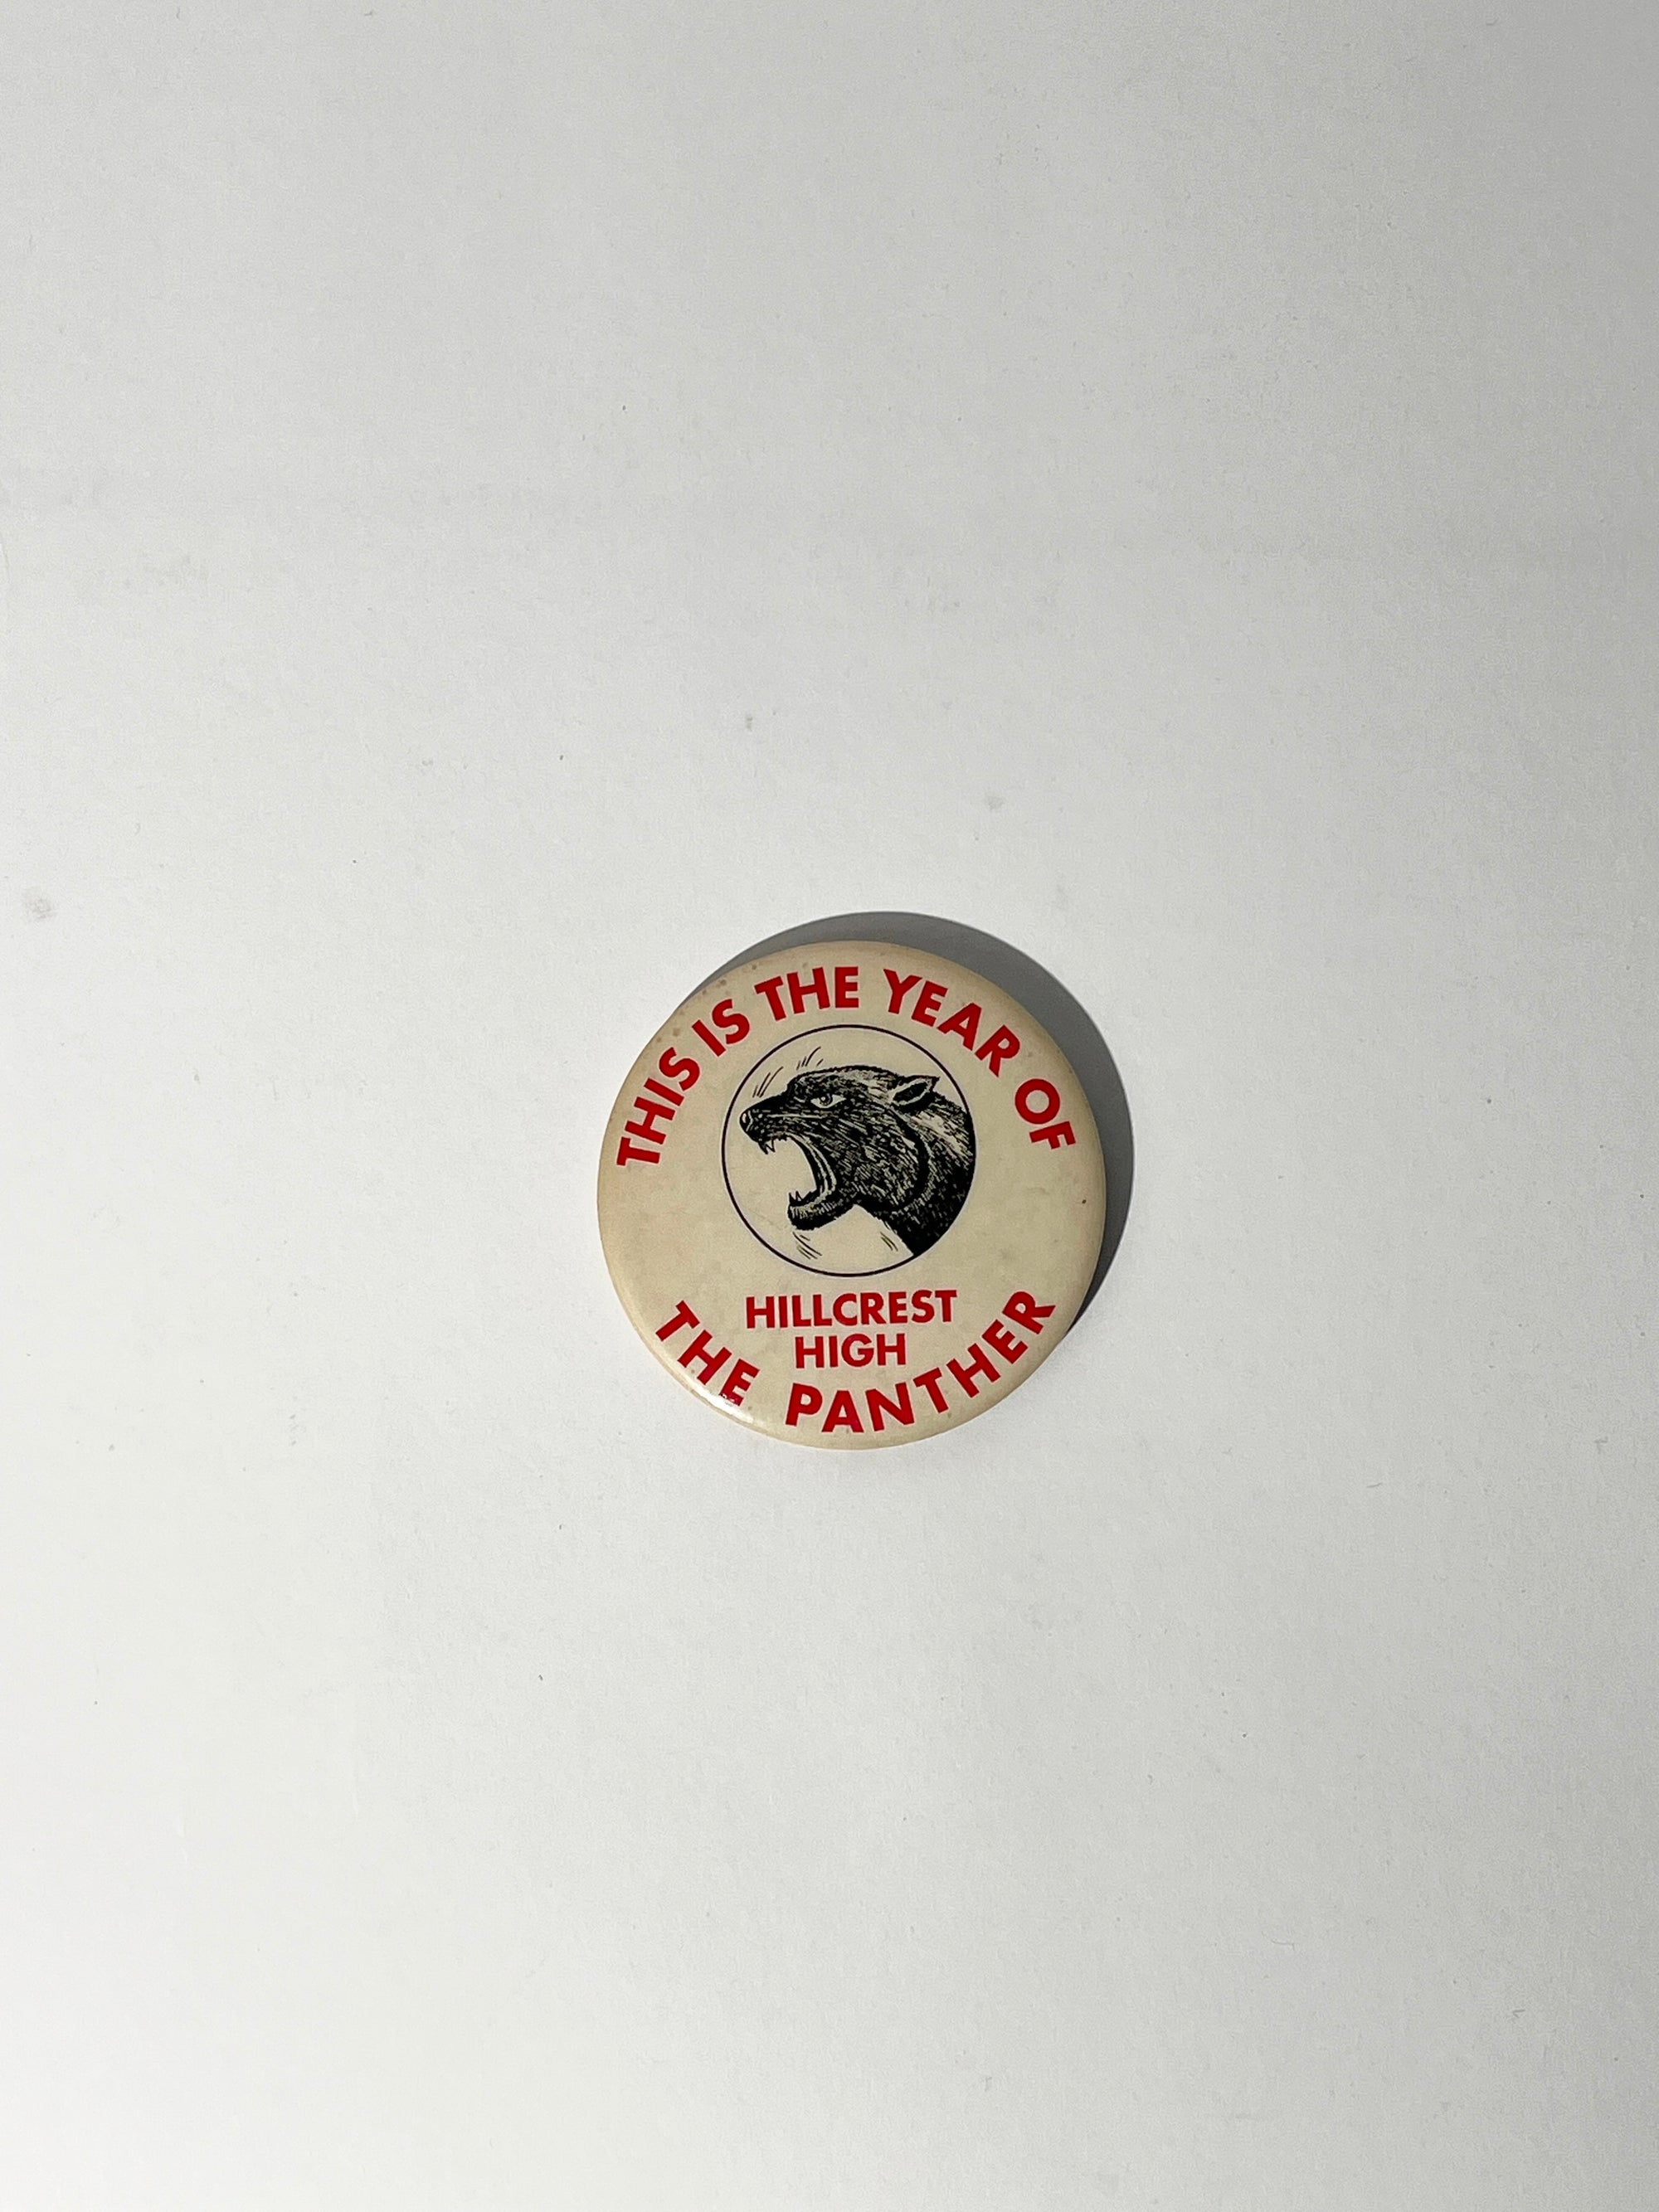 Hillcrest High "The Year of the Panther" Pin